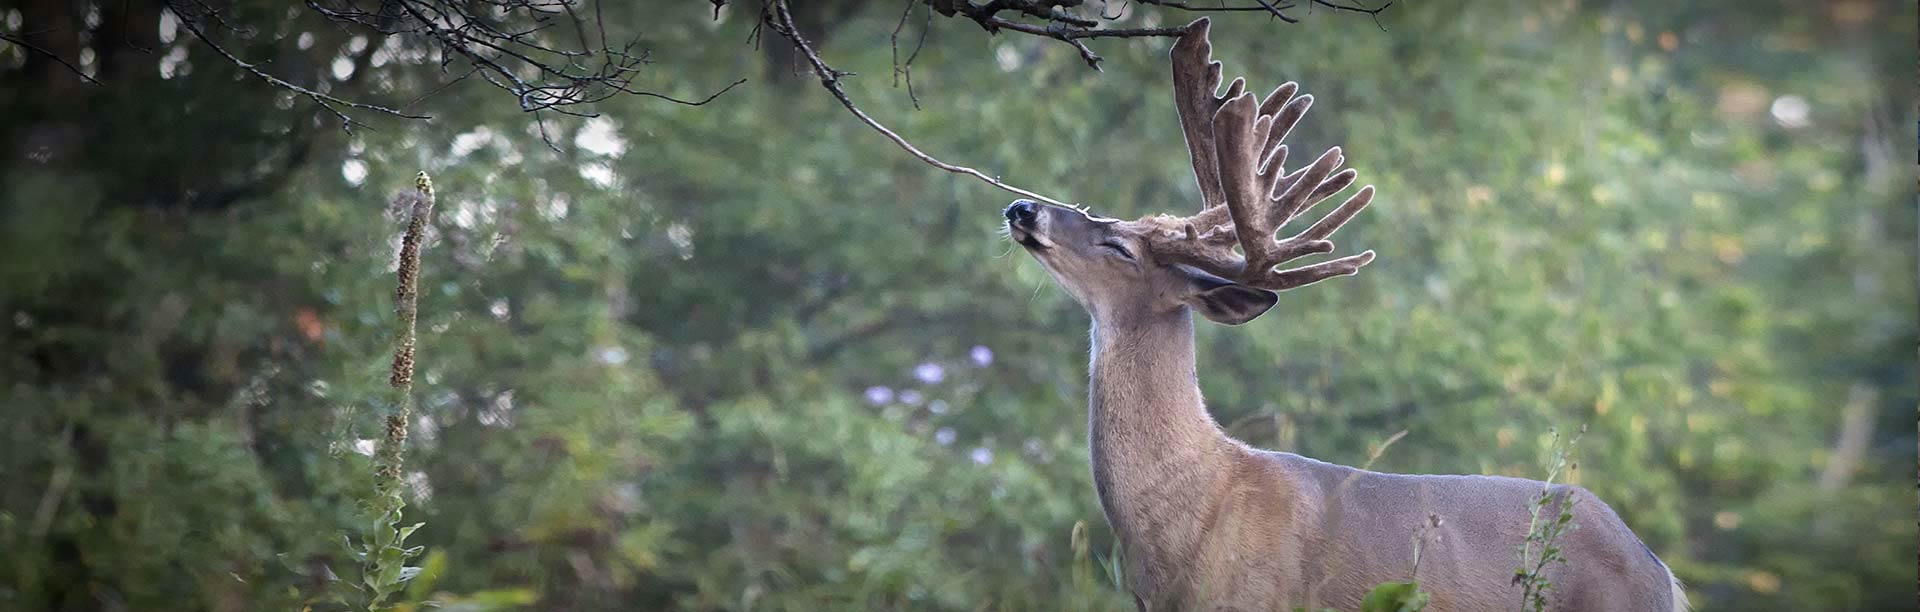 trophy whitetail deer scratching face